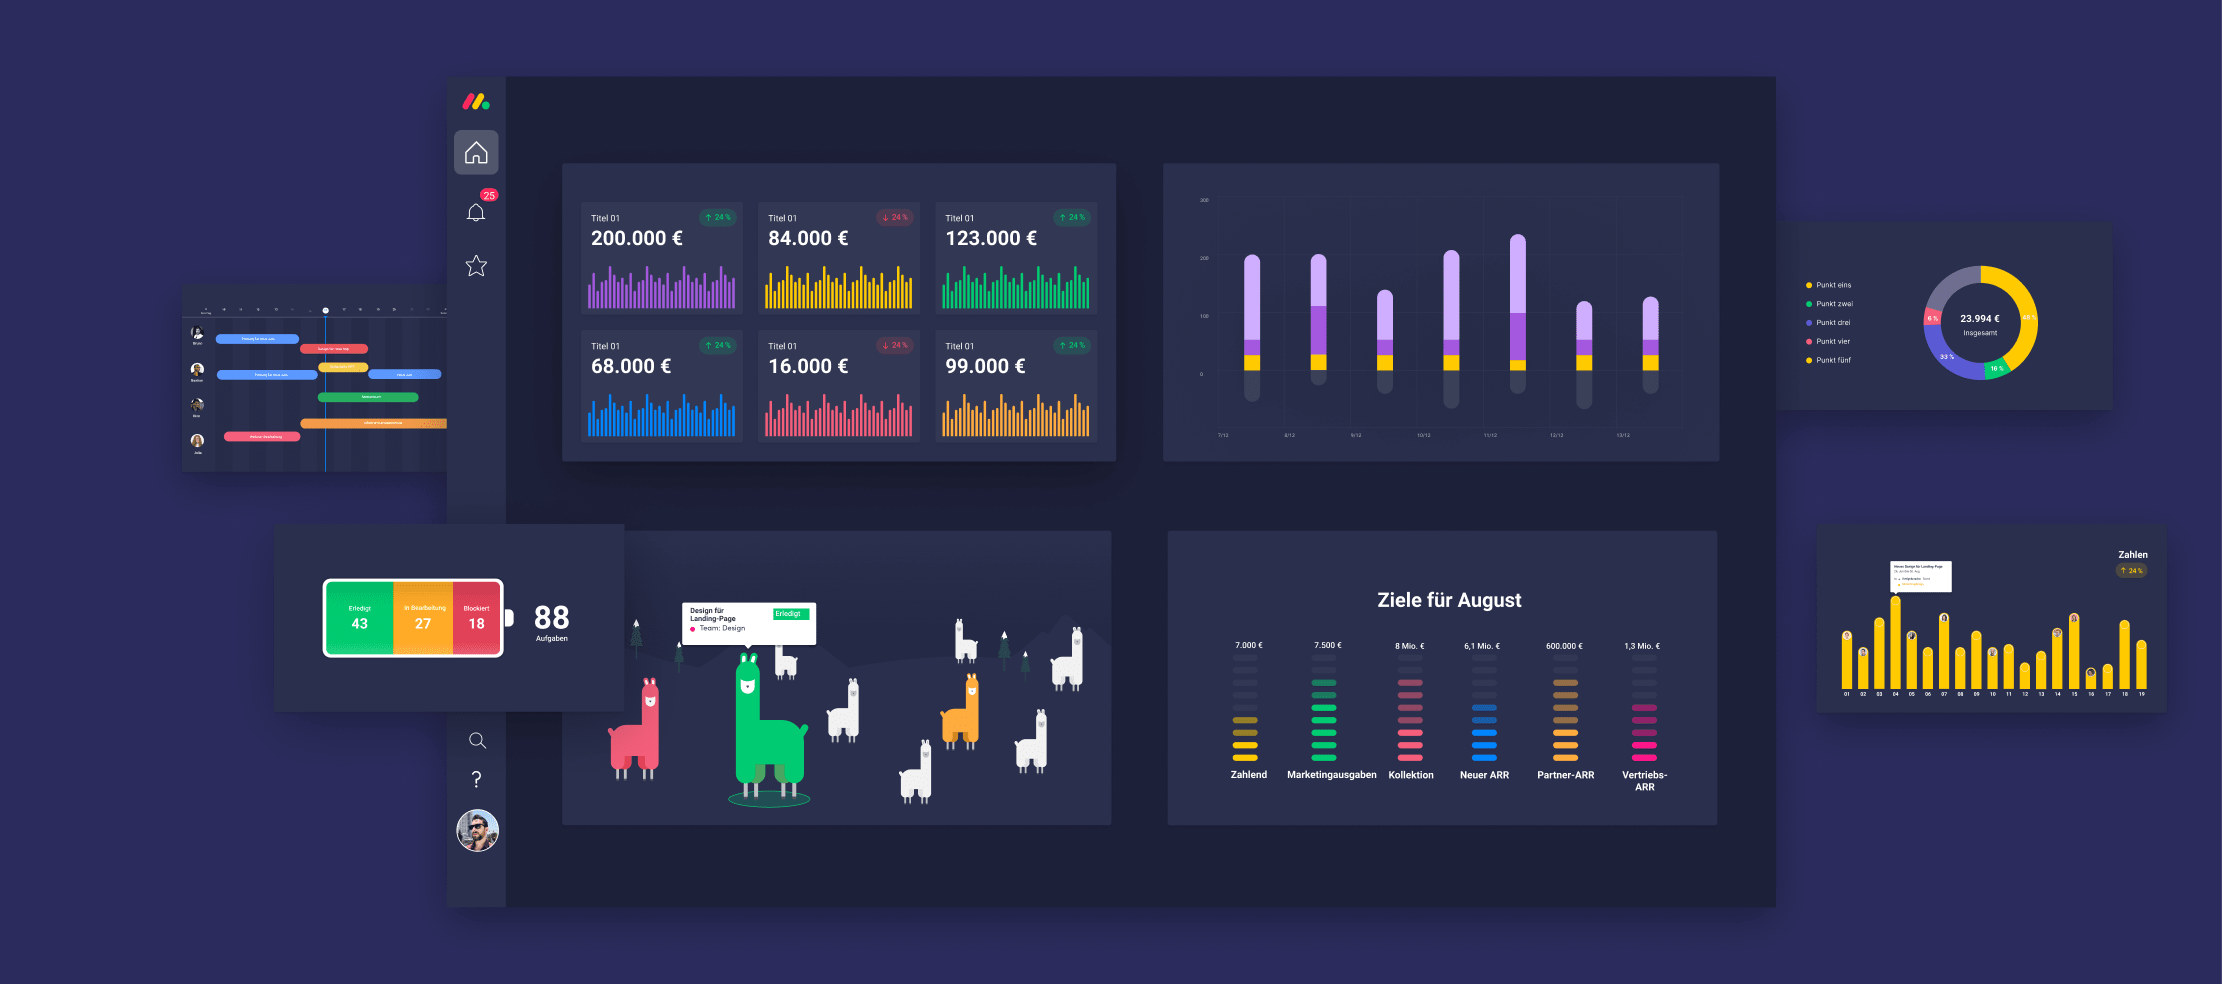 Large dashboard with various widgets